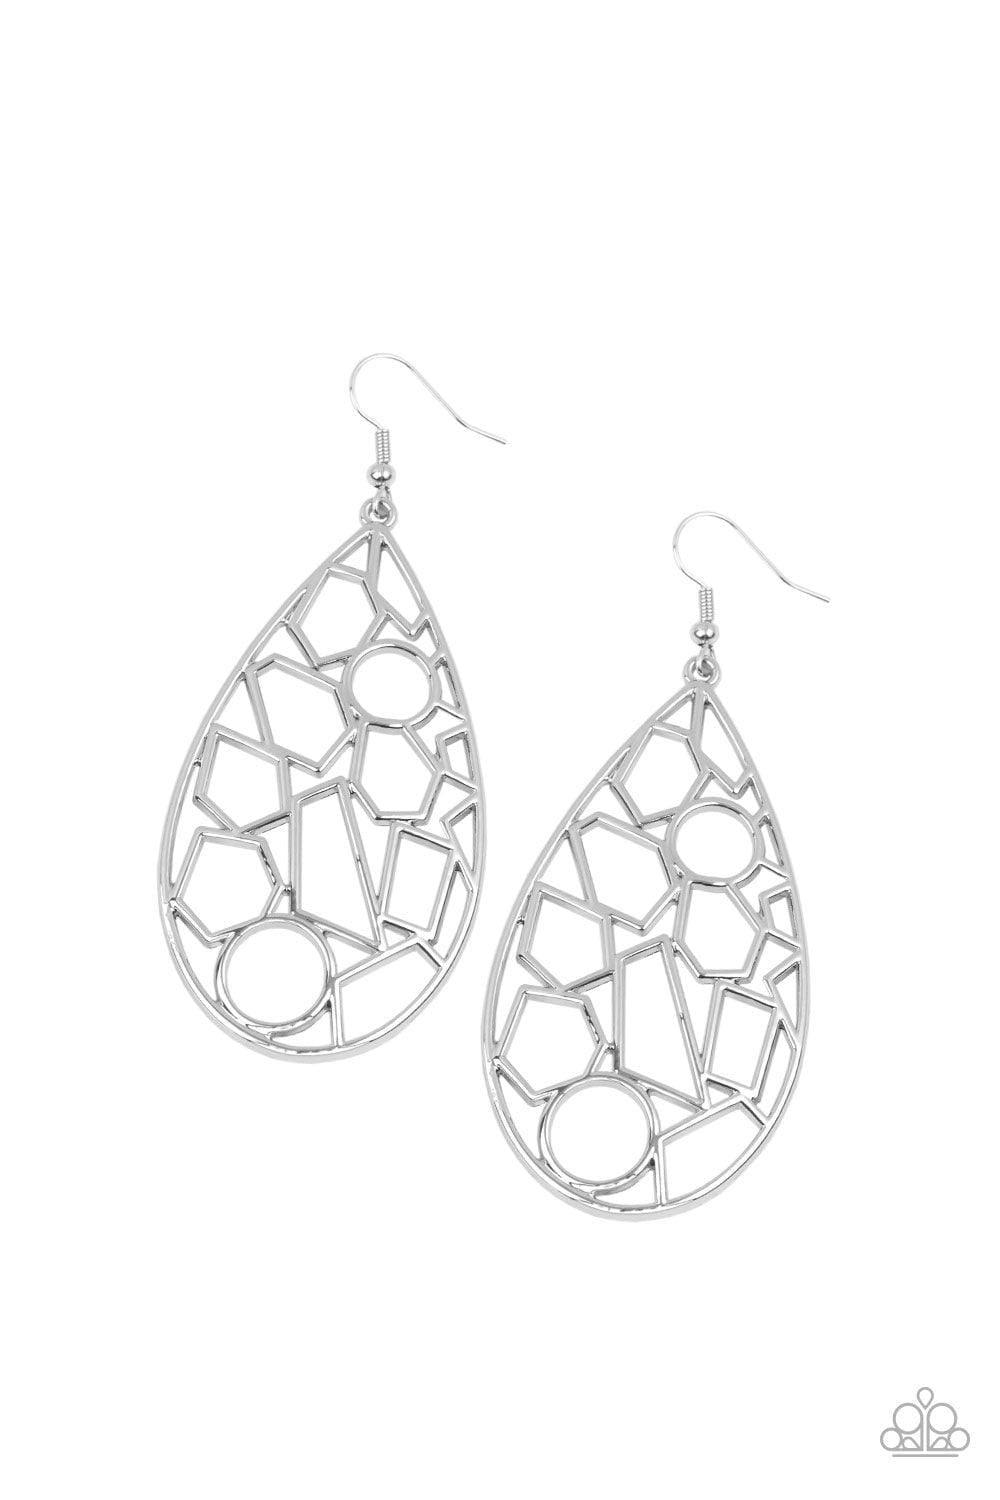 Paparazzi Accessories - Reshaped Radiance - Silver Earrings - Bling by JessieK